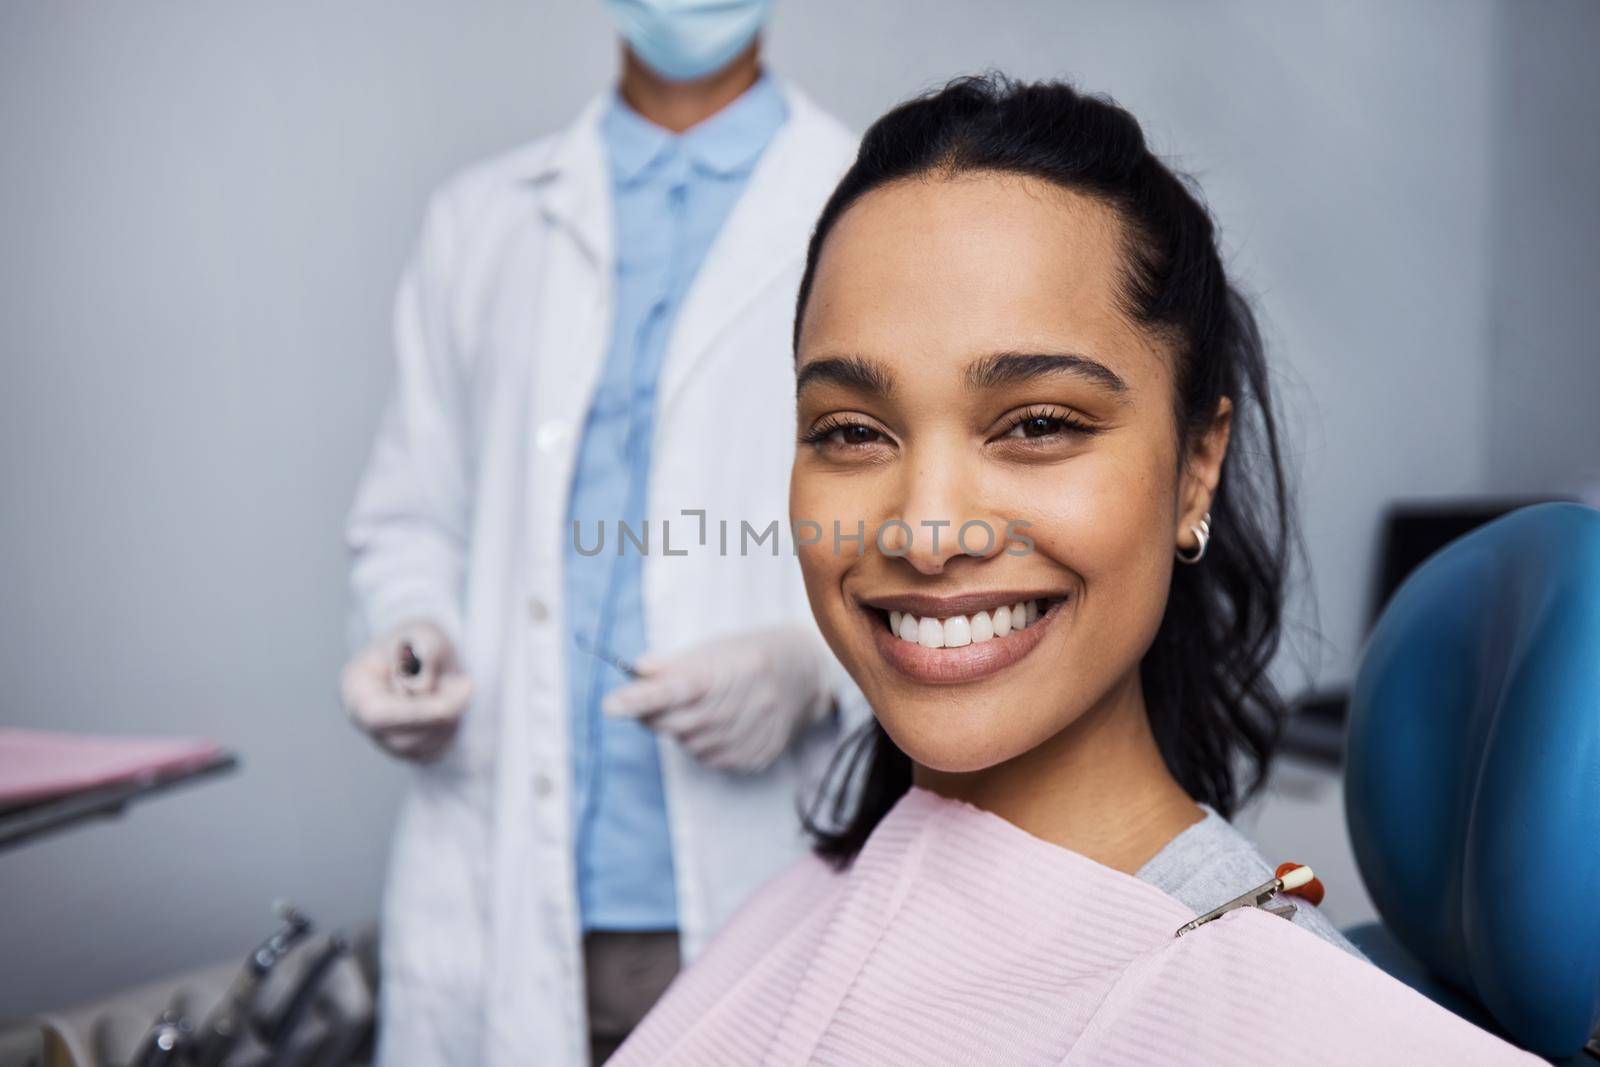 Portrait of a young woman having dental work done on her teeth.